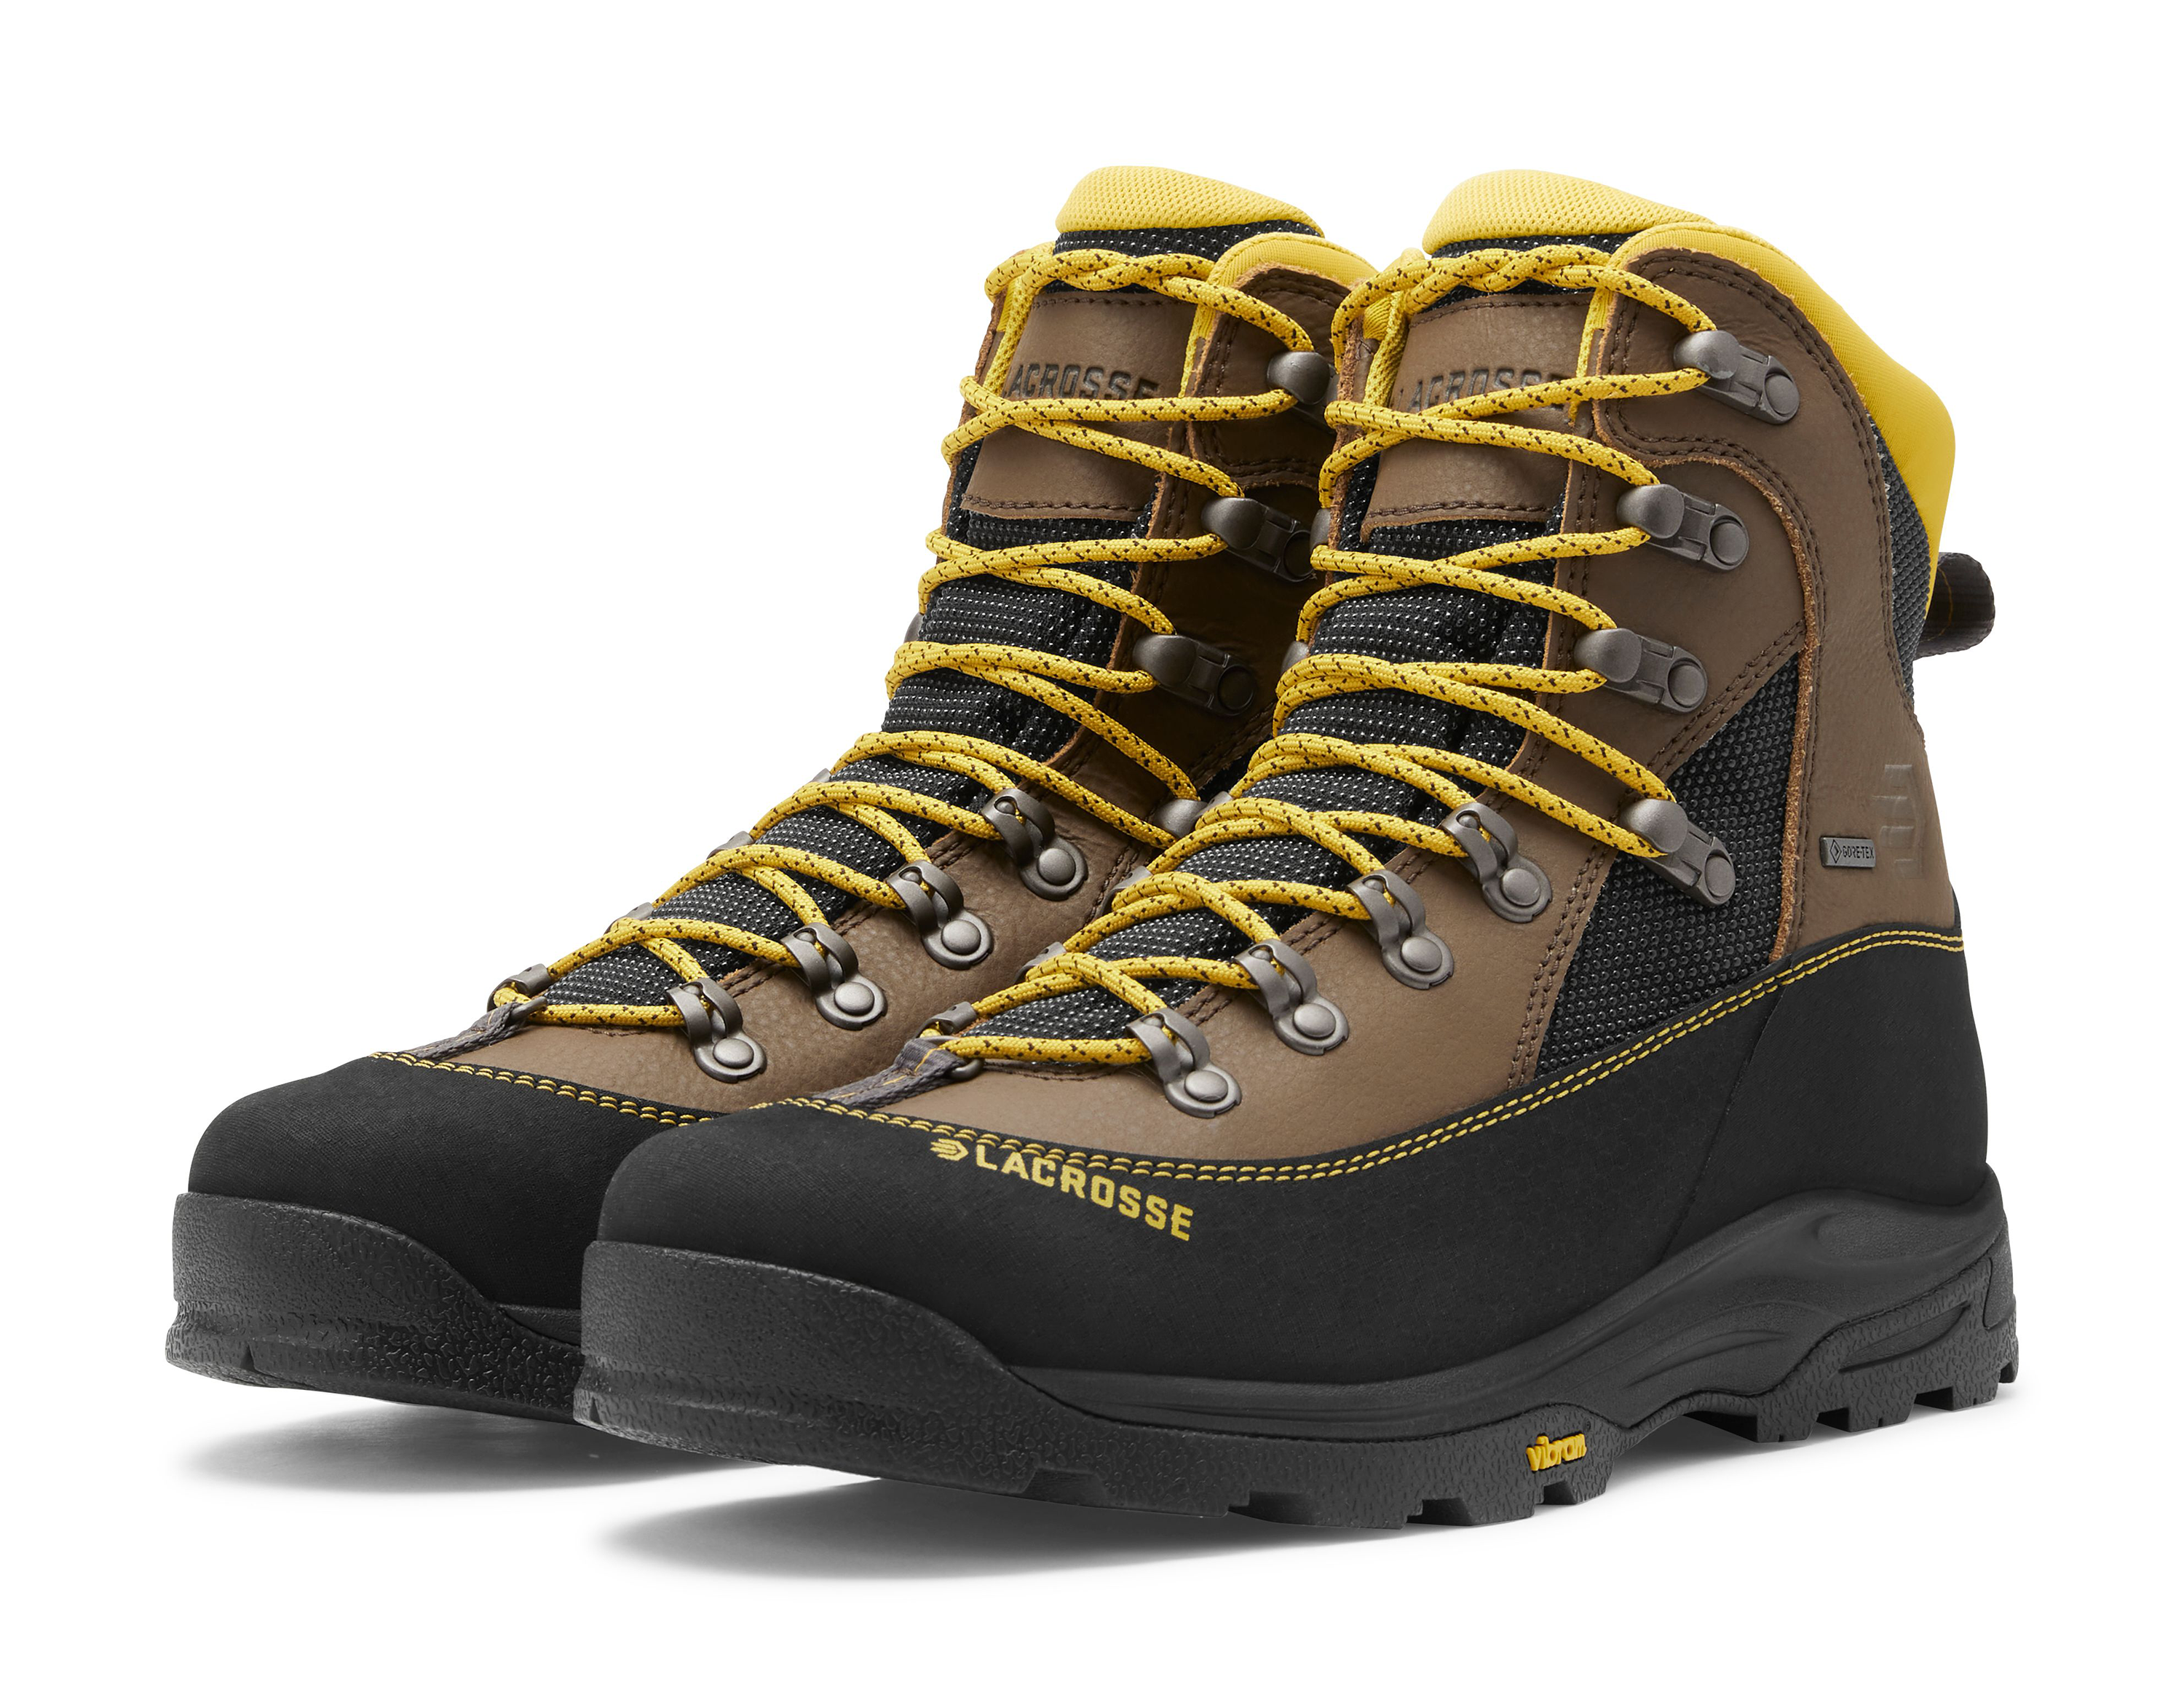 LaCrosse Ursa MS GORE-TEX Hunting Boots for Men